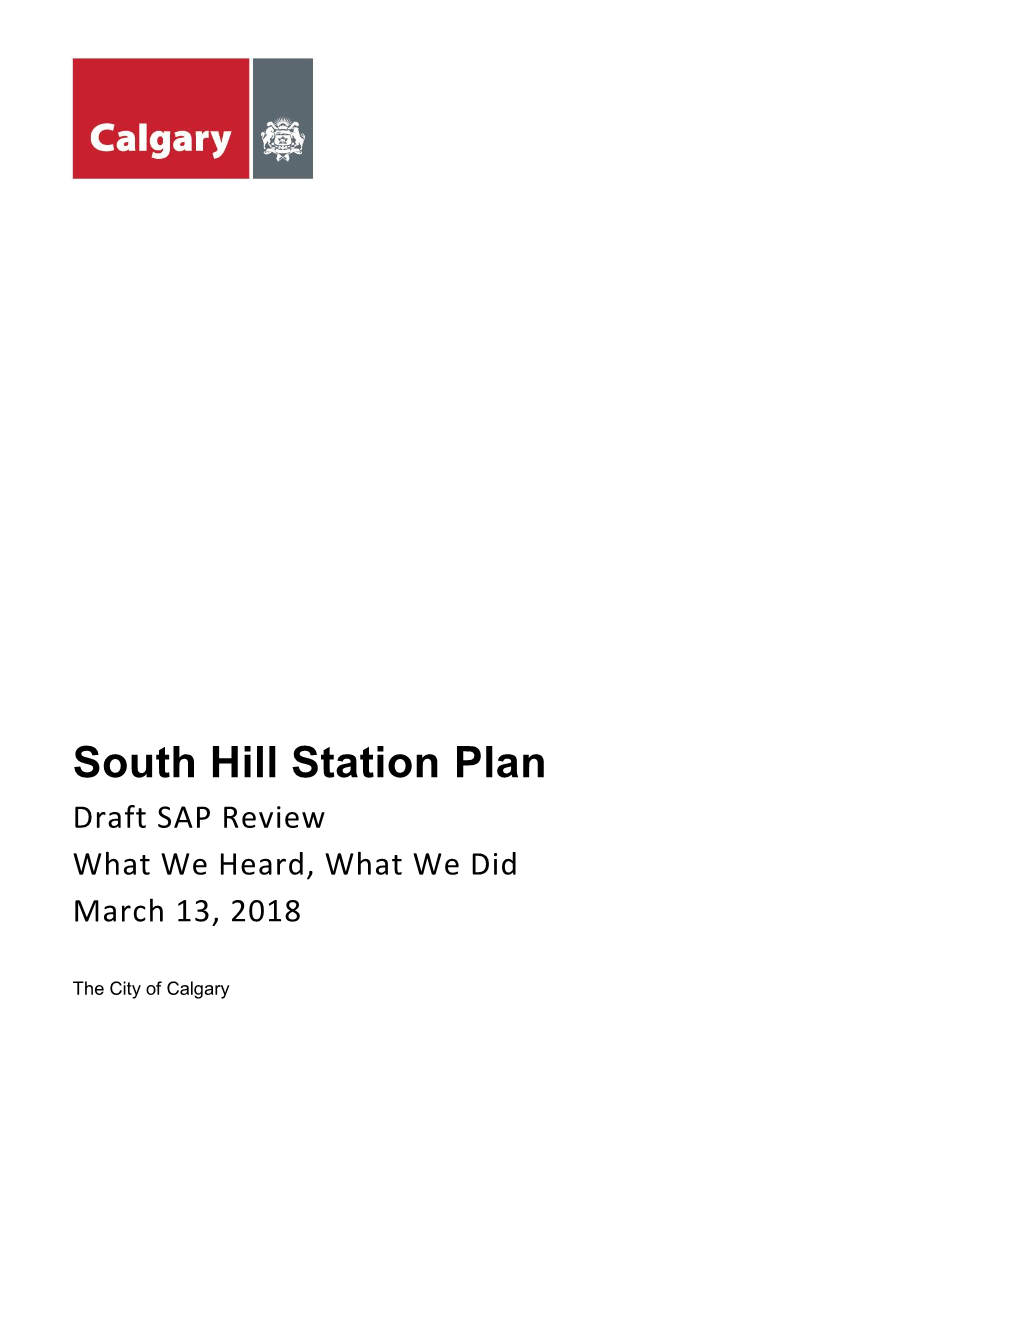 South Hill Station Plan Draft SAP Review What We Heard, What We Did March 13, 2018